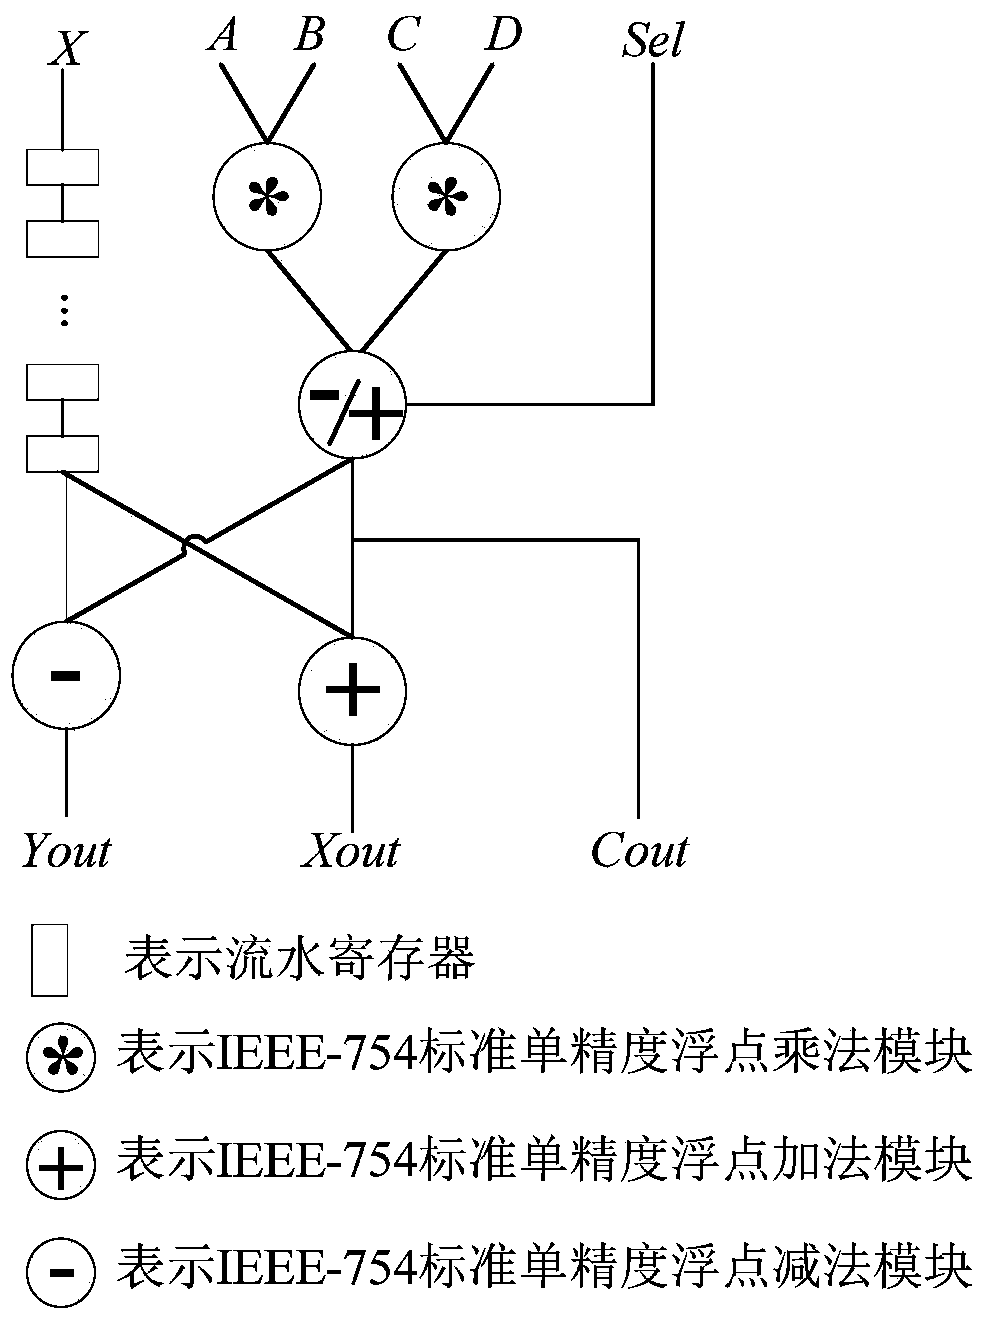 A hardware implementation circuit of fft butterfly operation supporting complex multiplication